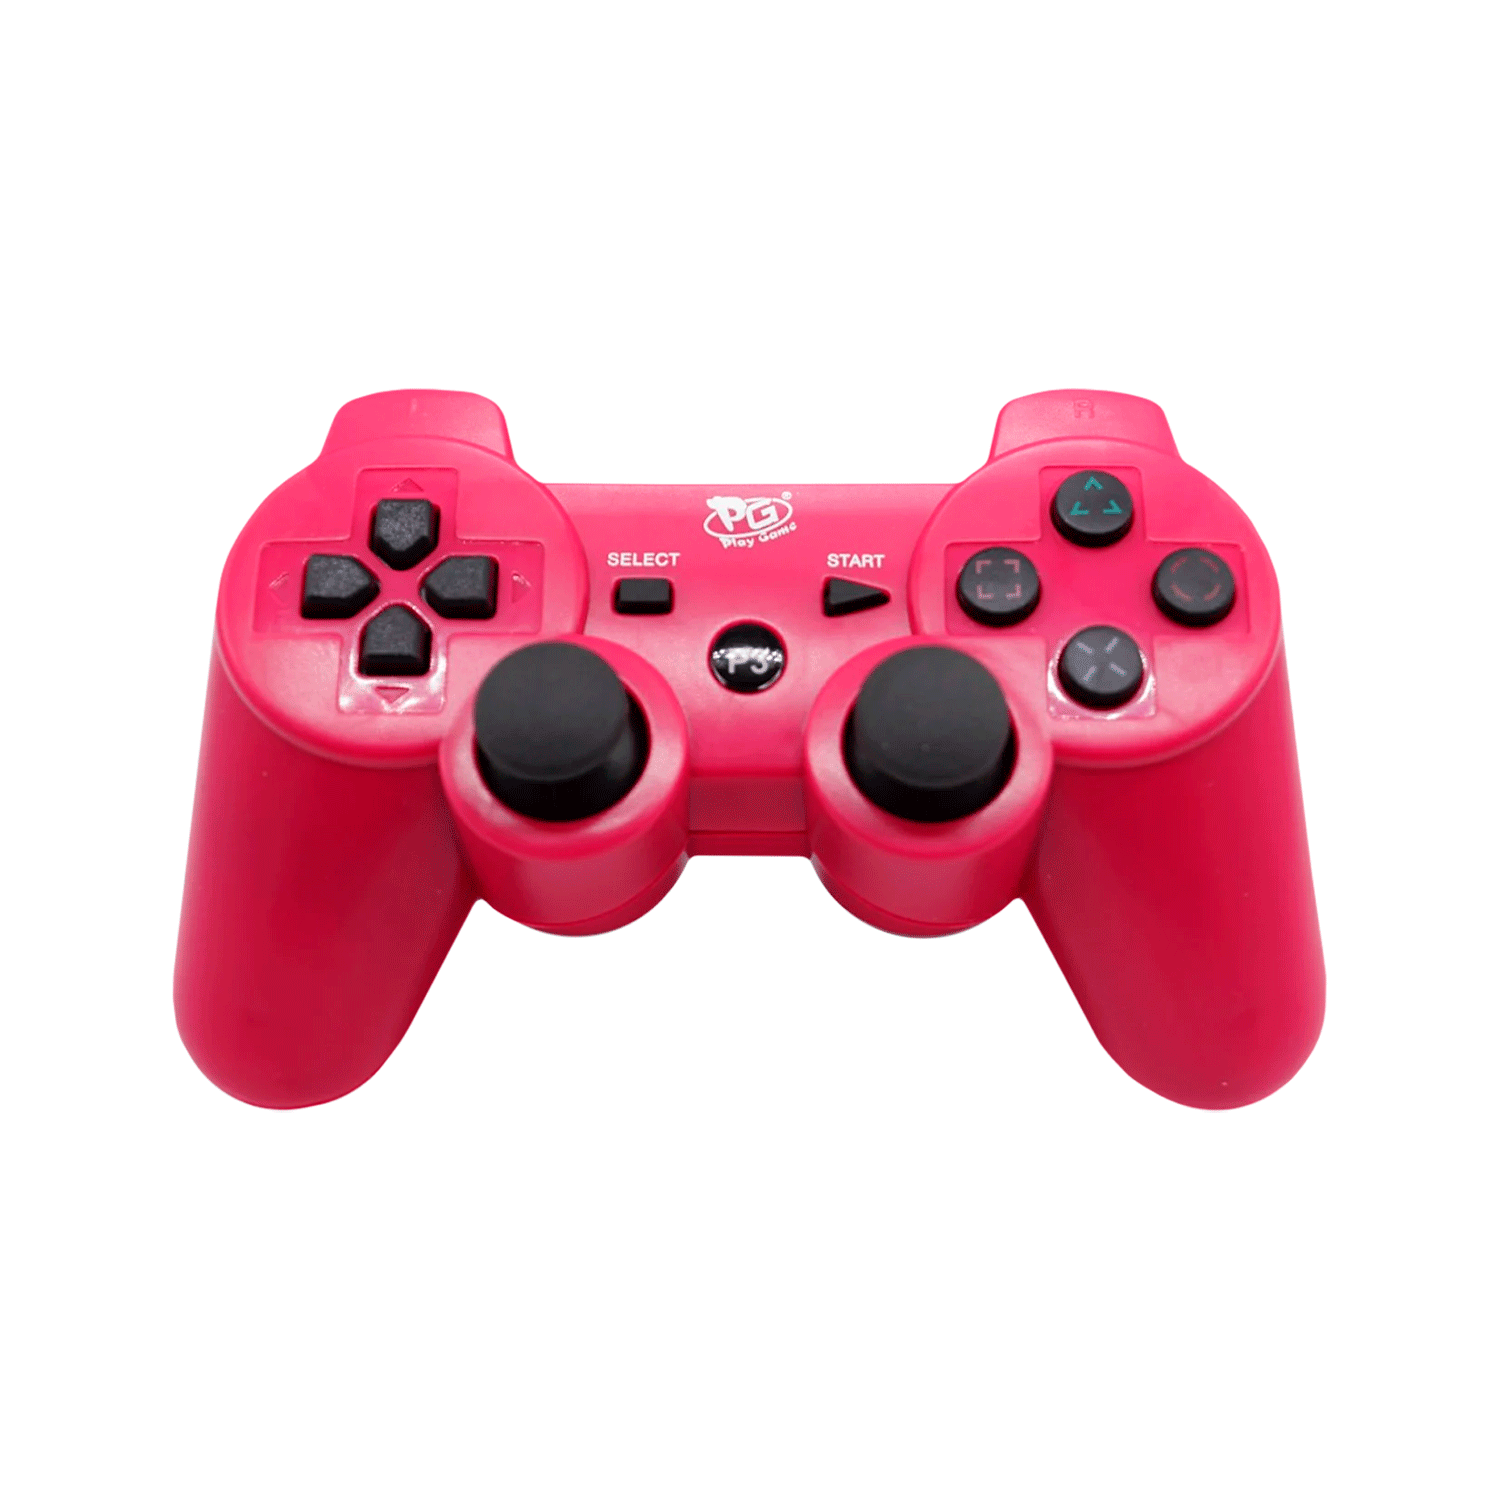 Controle Play Game para PS3 - Rosa